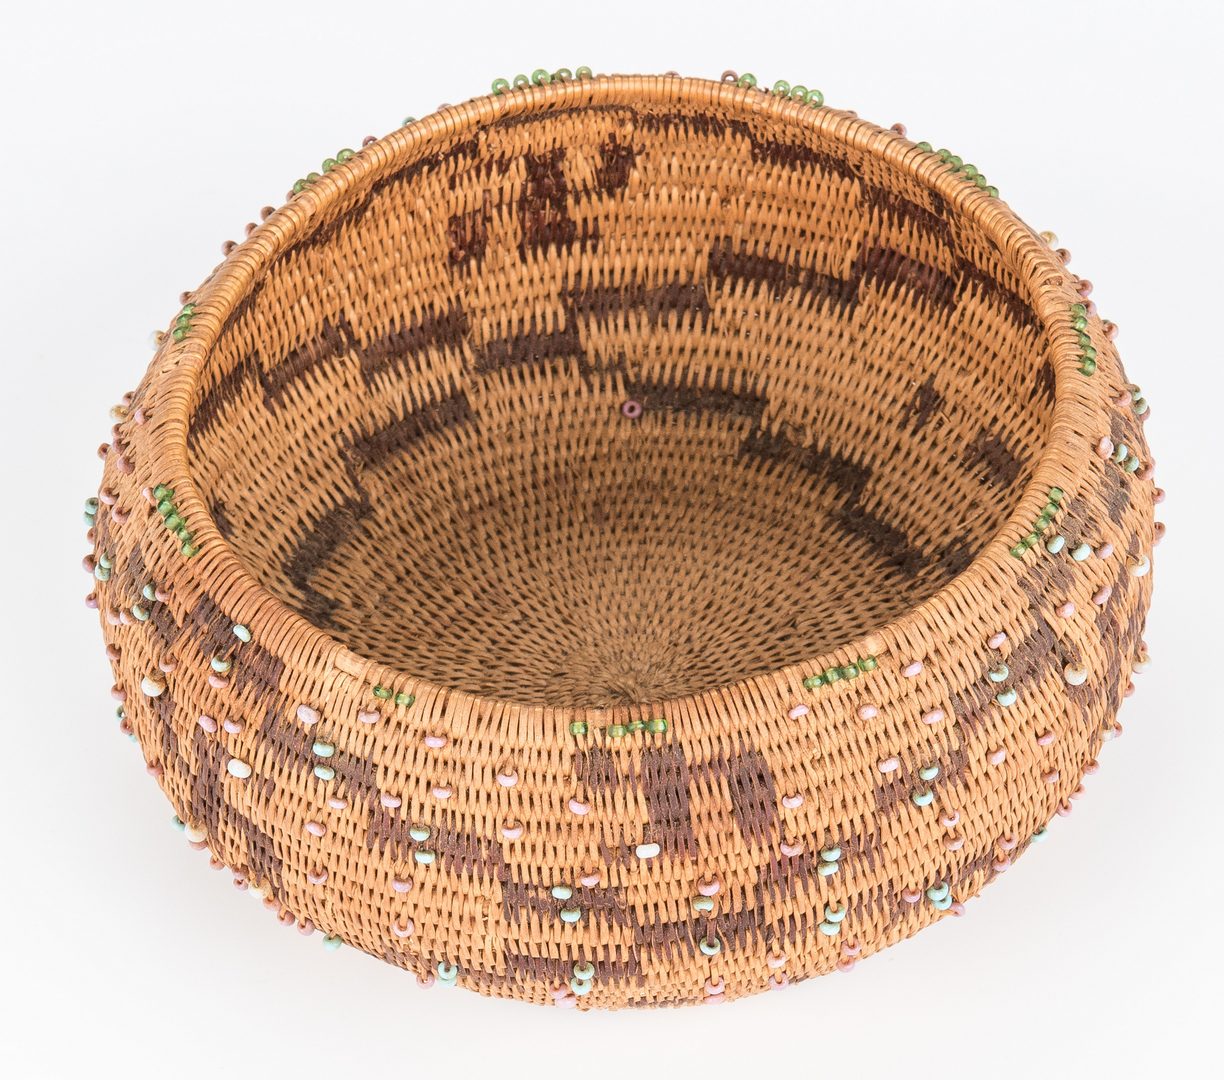 Lot 686: 2 Native American Pomo Baskets, 1 Feather